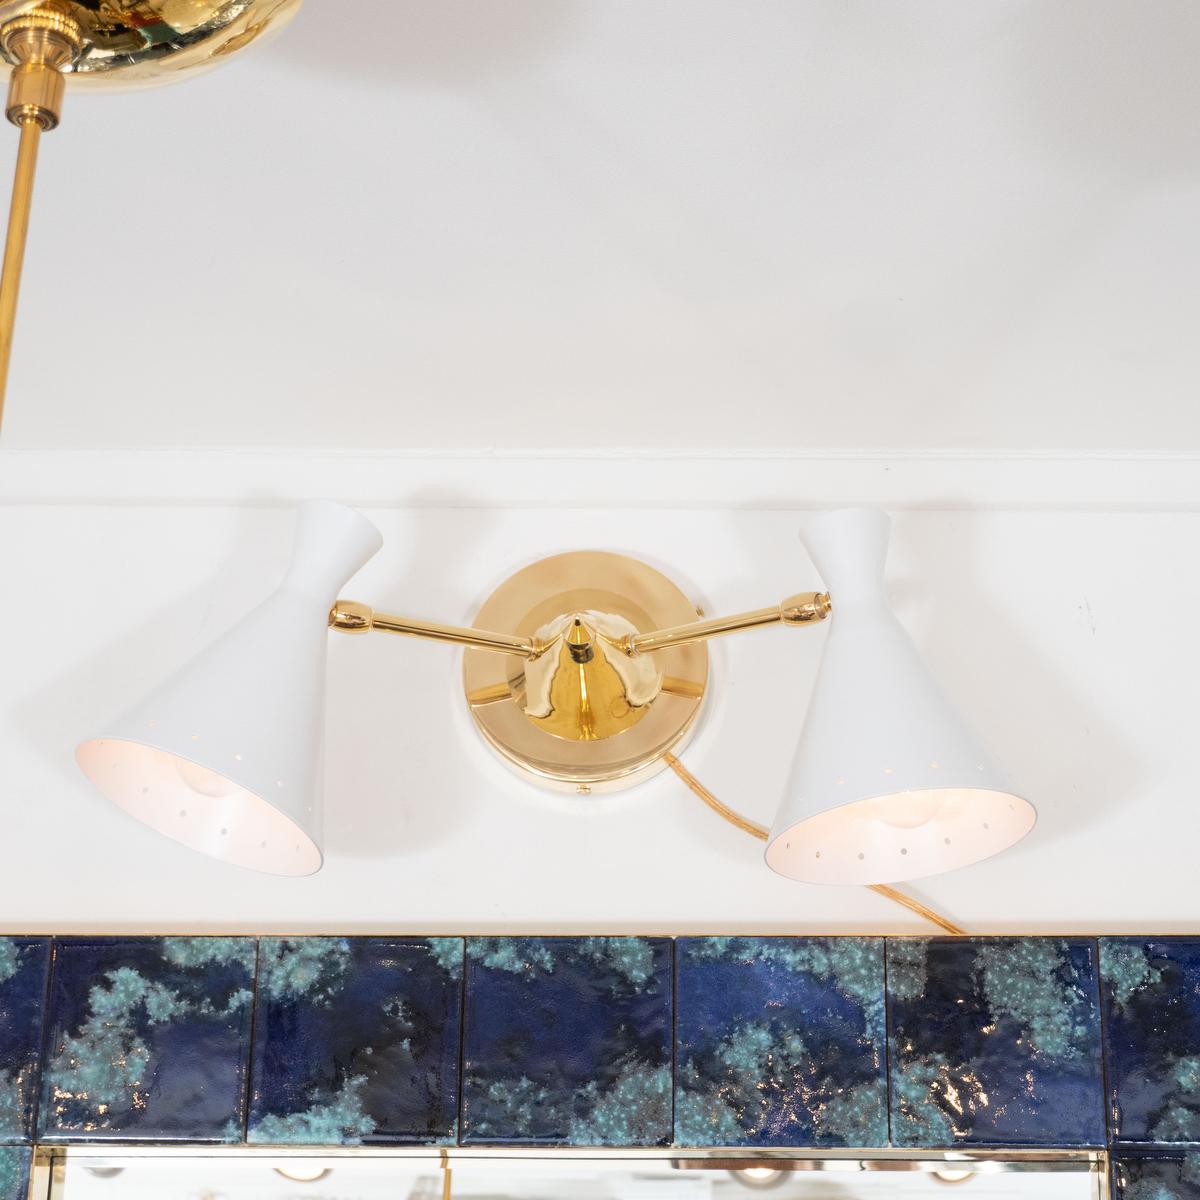 Pair of two-arm, spotlight sconces with articulated arms and enameled metal shades.